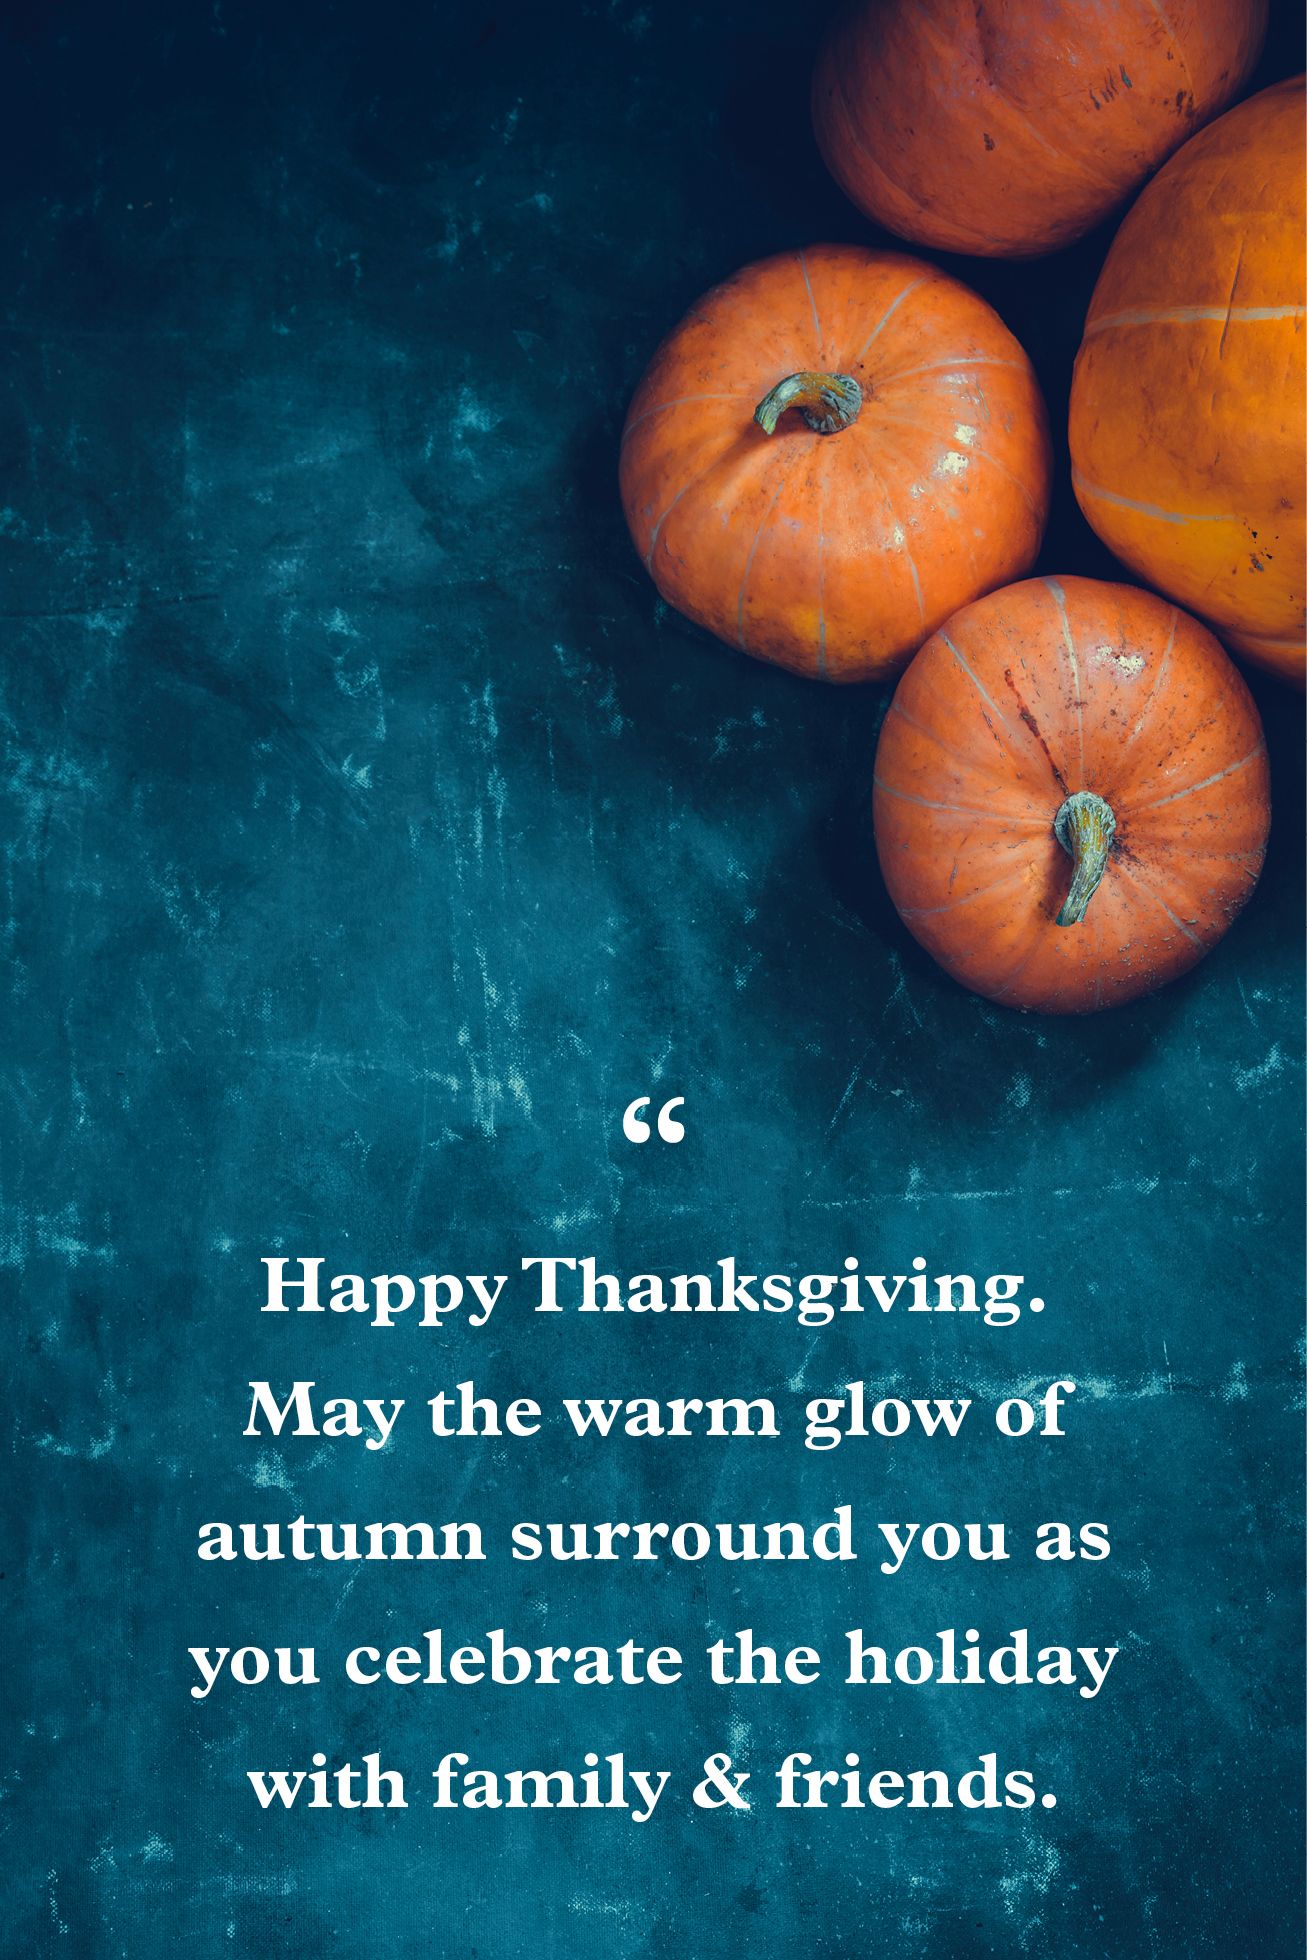 happy-thanksgiving-message-to-students-expressing-gratitude-and-wishing-a-joyous-holiday-season